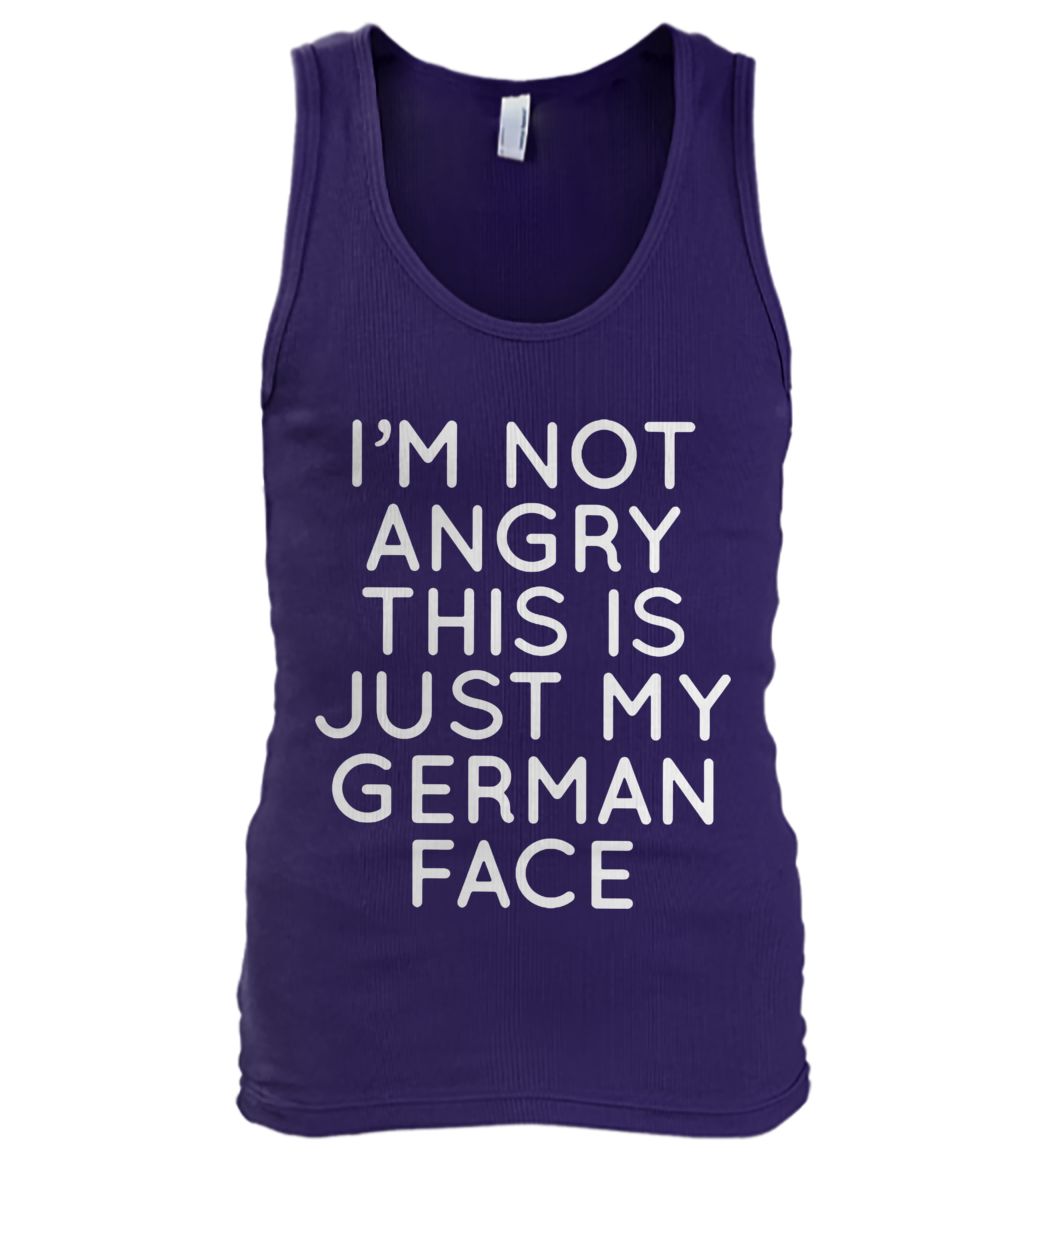 I'm not angry this is just my german face men's tank top